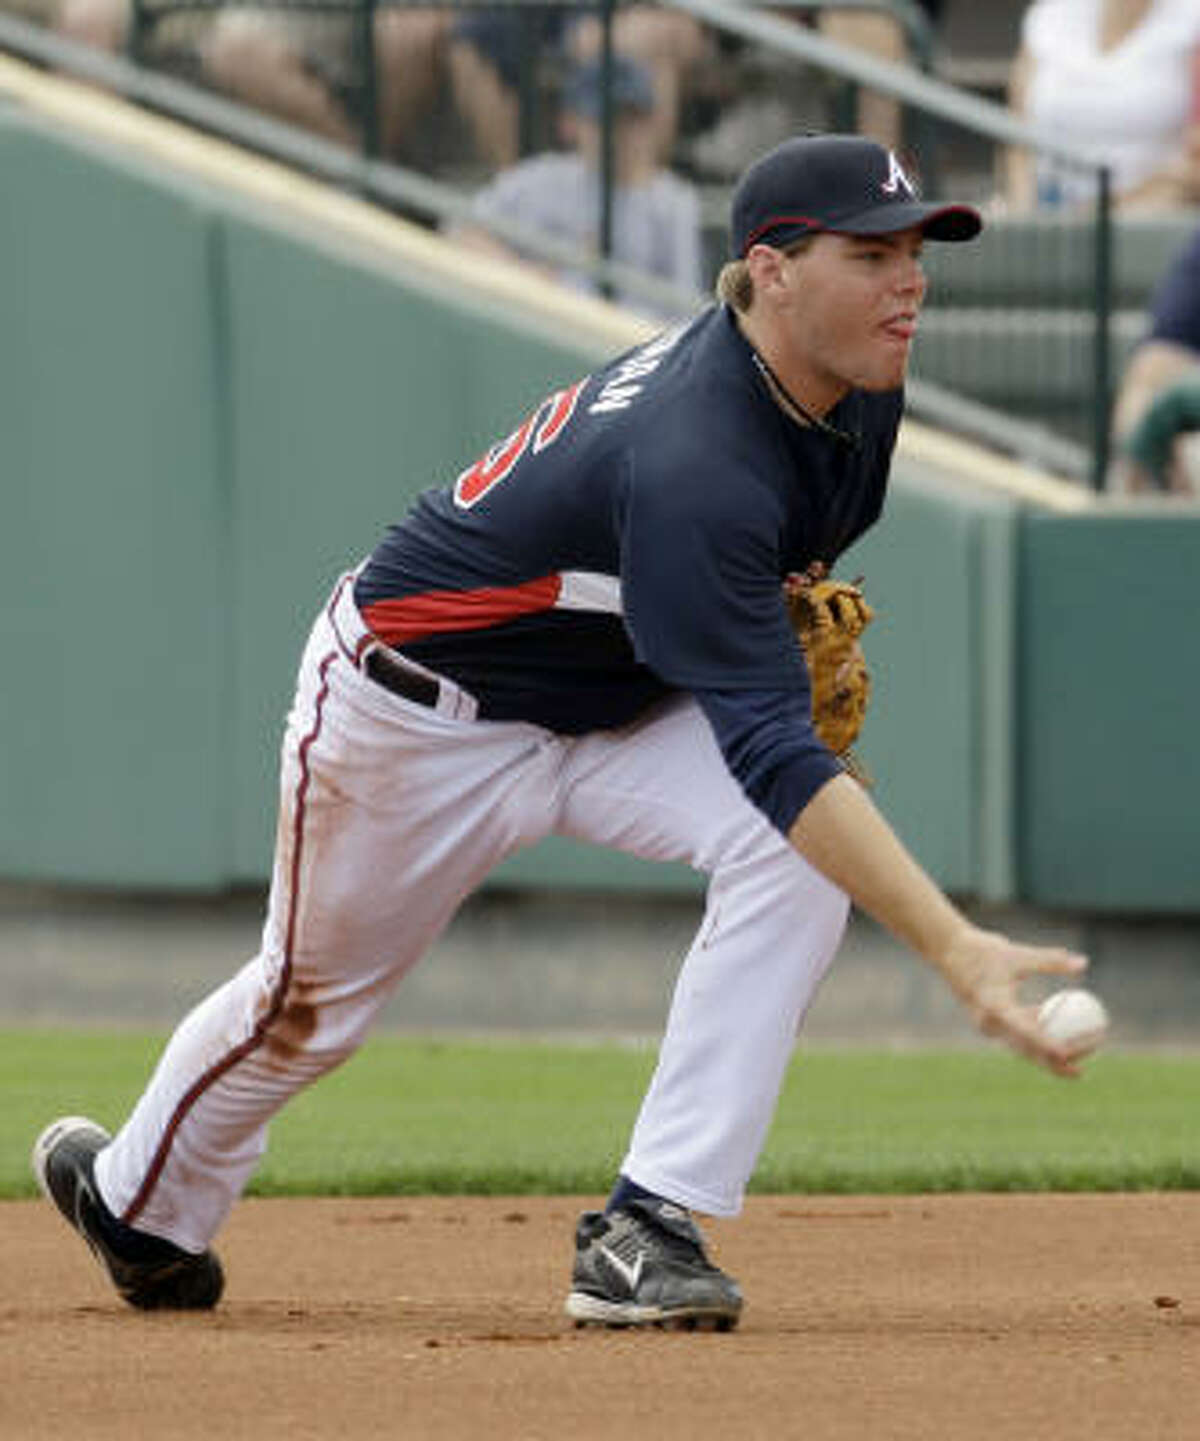 Atlanta Braves first baseman Freddie Freeman flips the ball to the bag to force out Astros first baseman Lance Berkman to end the first inning.